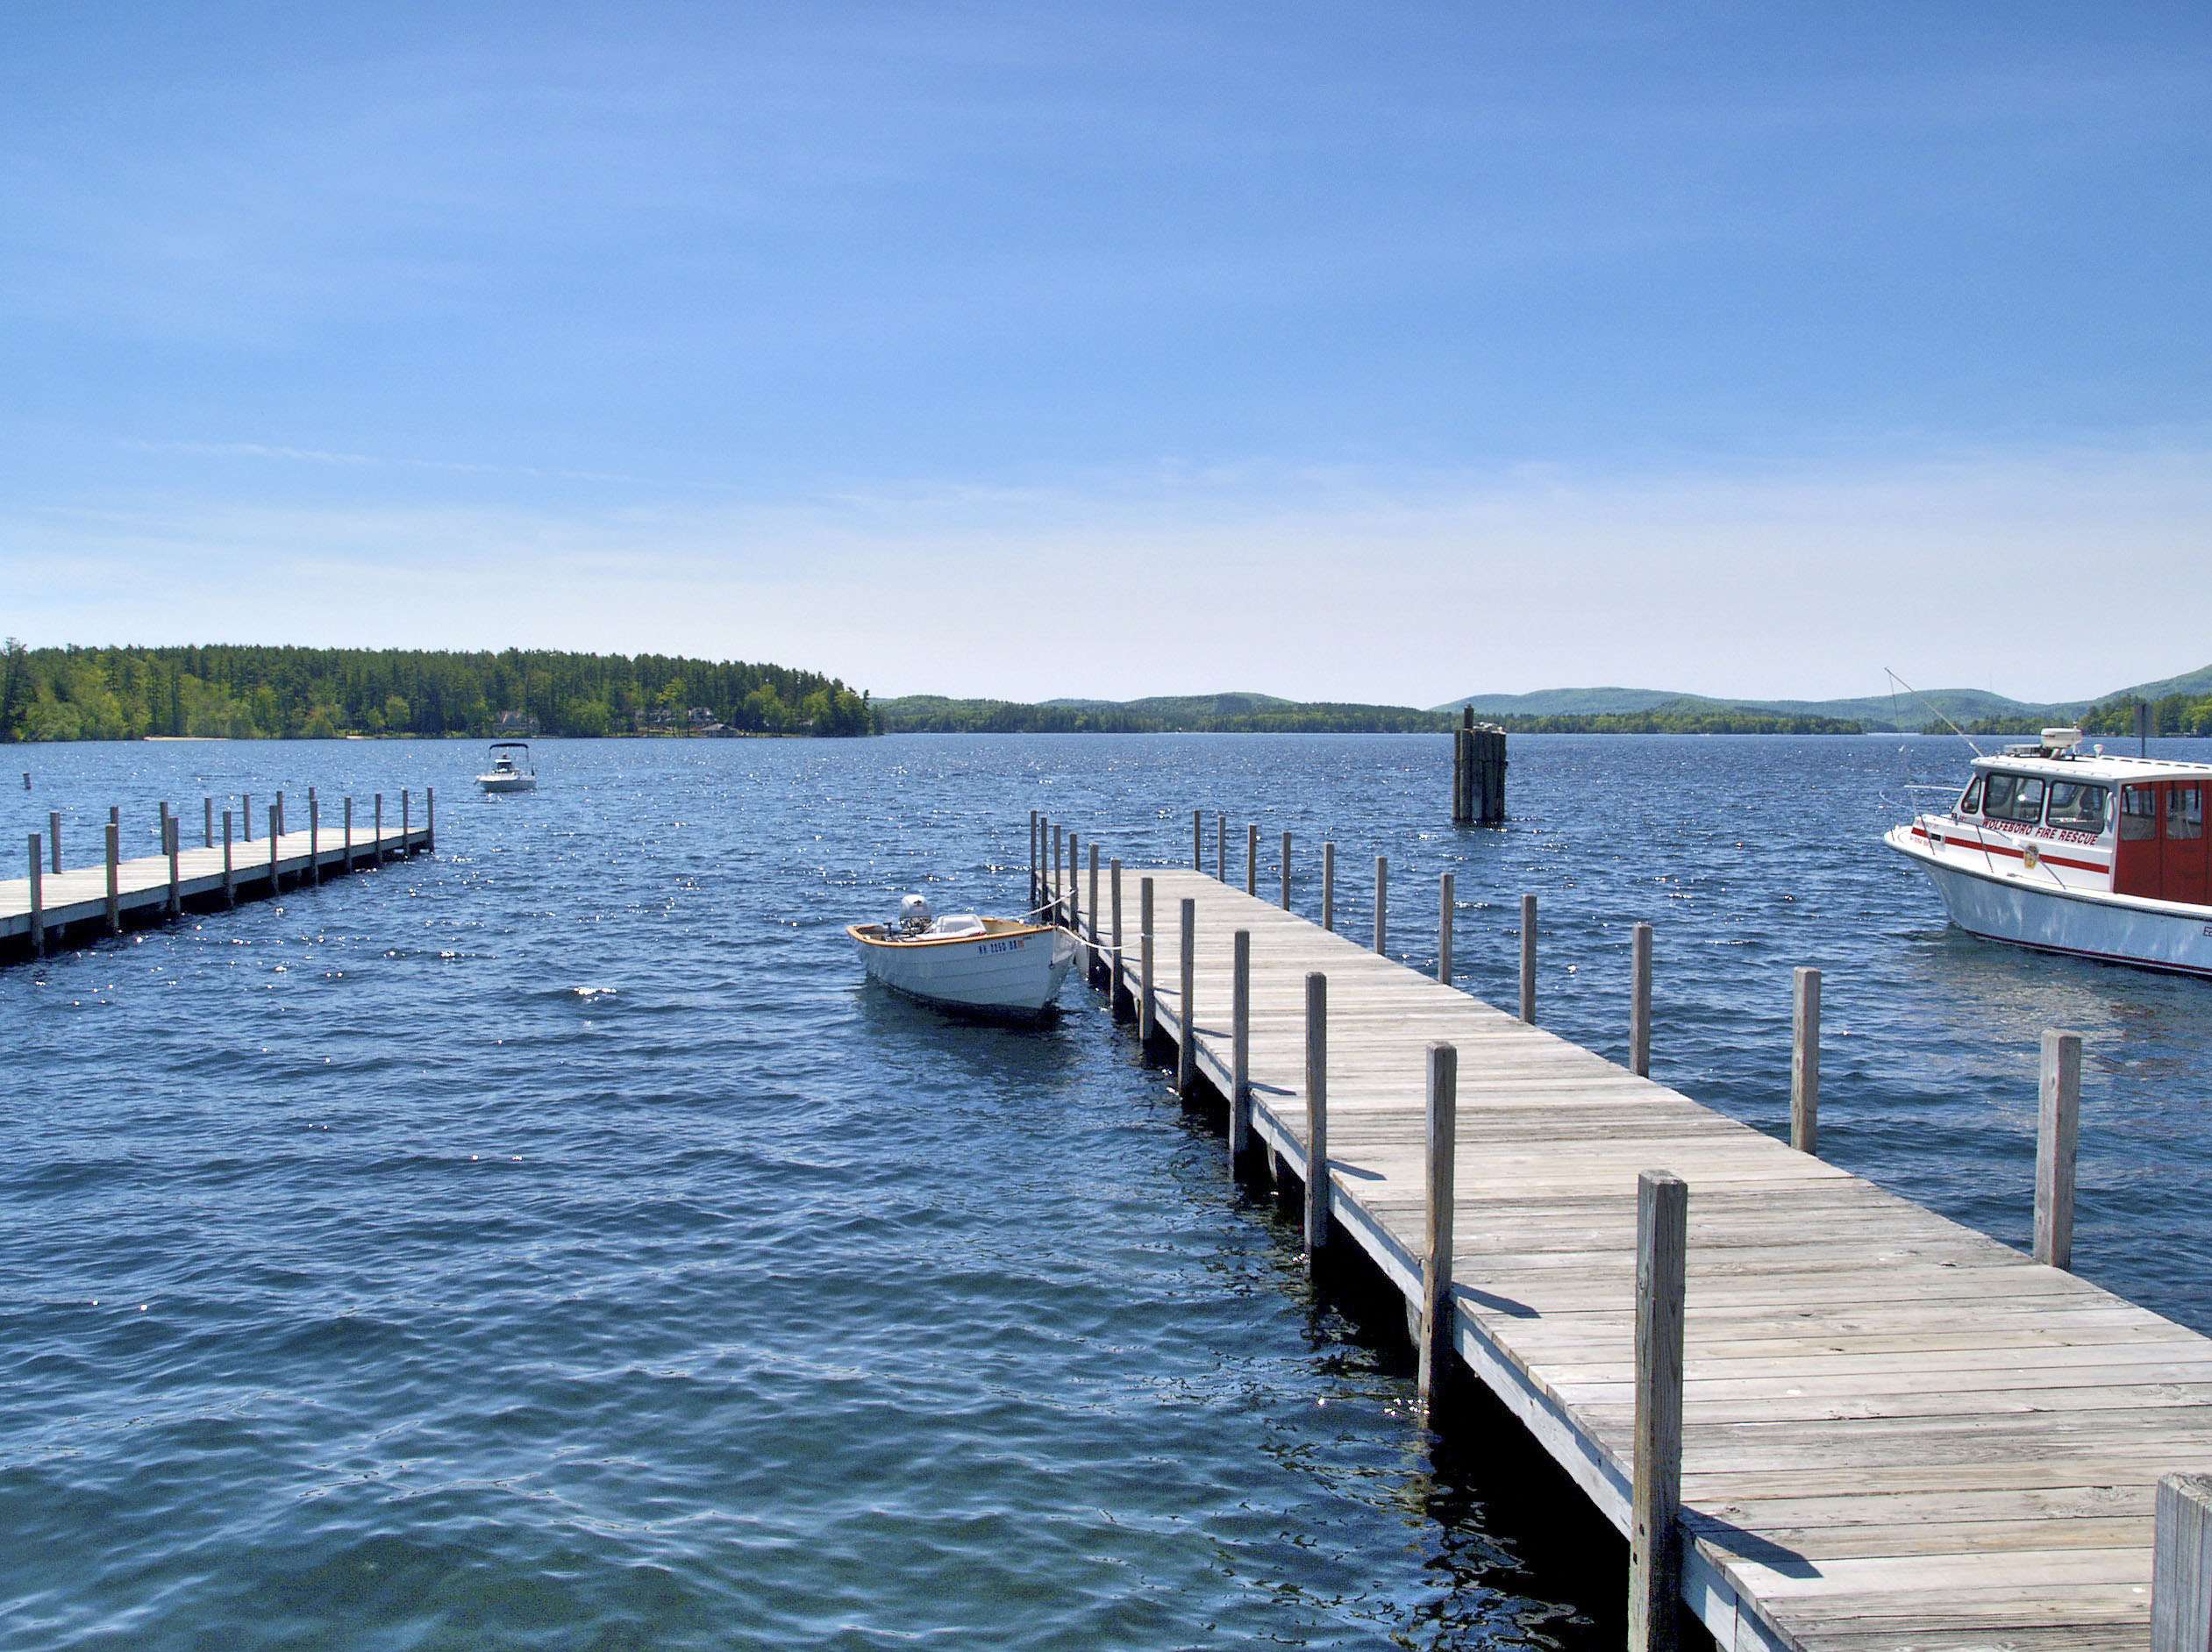 <h4>24. Lake Winnipesaukee, New Hampshire </h4> [20 miles long, 9 miles wide] <br> Anglers continue to catch quality largemouth and smallmouth bass from Winnipesaukee. John Foster, New Hampshire B.A.S.S. Nation president, believes reduced pressure due to COVID-19 restrictions has allowed the bass to flourish. âThe smallmouth population is running about a half-pound larger than [in] previous years,â he said. It took 20.93 to win a 37-boat tournament here in early May 2021 that had a four-bass limit. The second- and third-place anglers weighed in well over 16 pounds. Two largemouth over 6 pounds were caught. The biggest smallmouth weighed 5.85.
